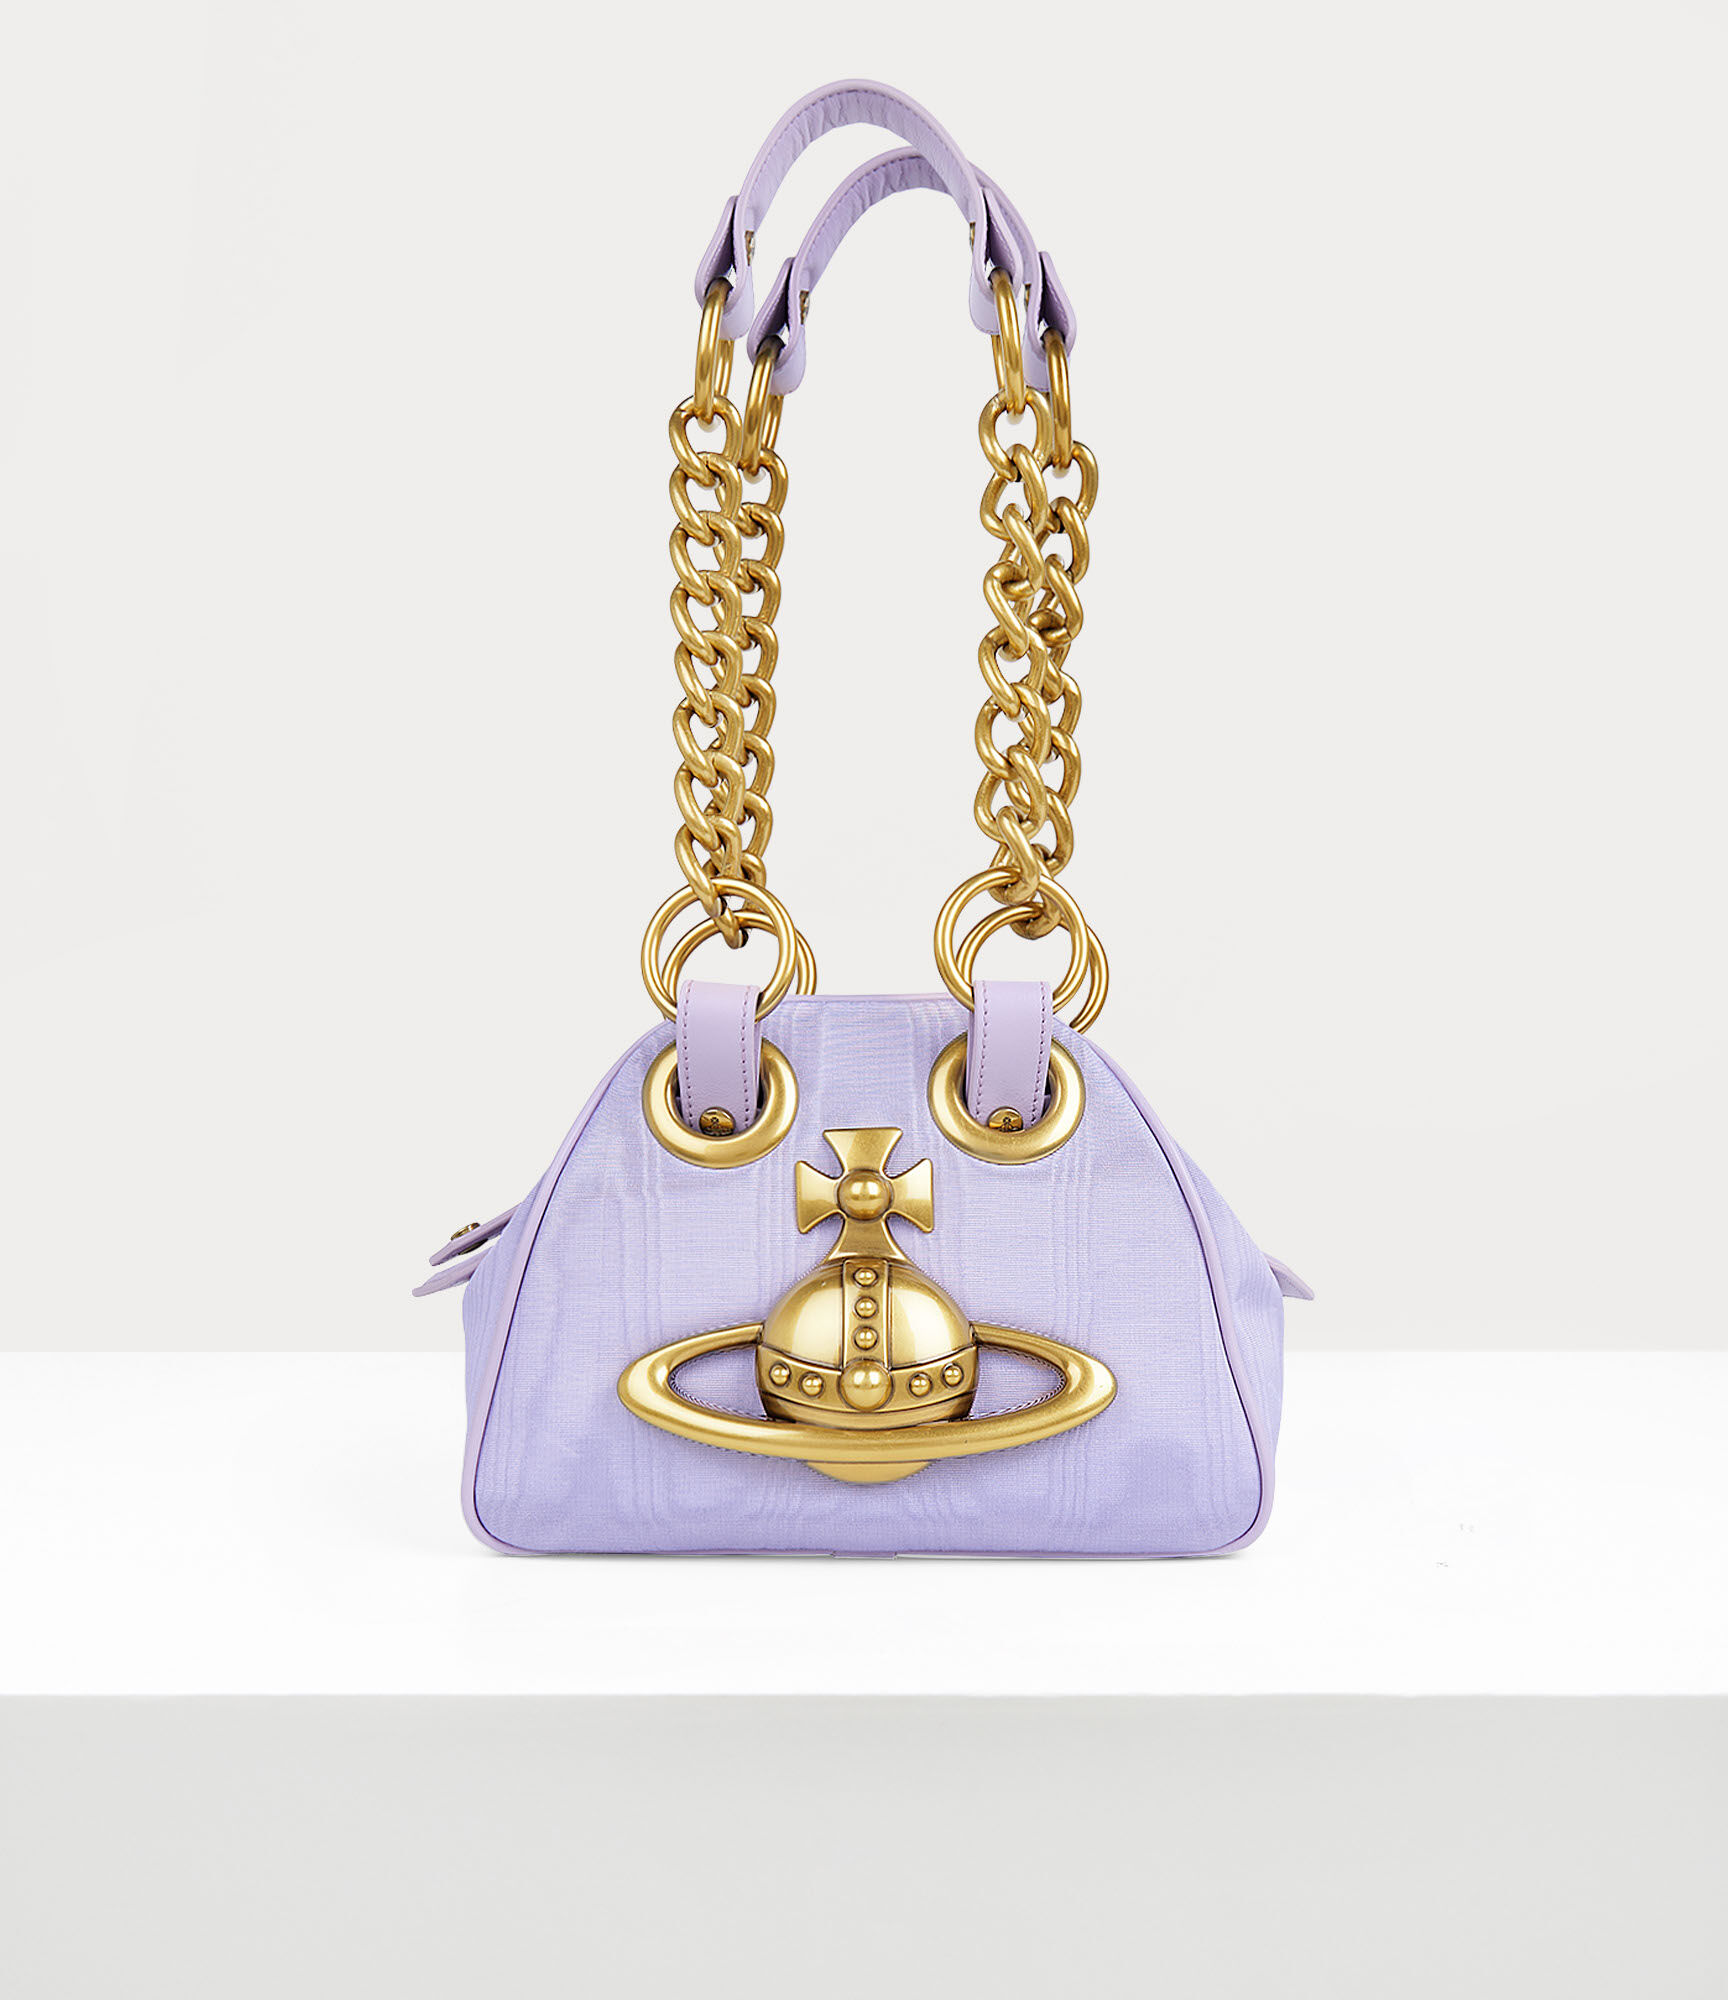 Archive Orb Chain Handbag in LILAC | Vivienne Westwood®